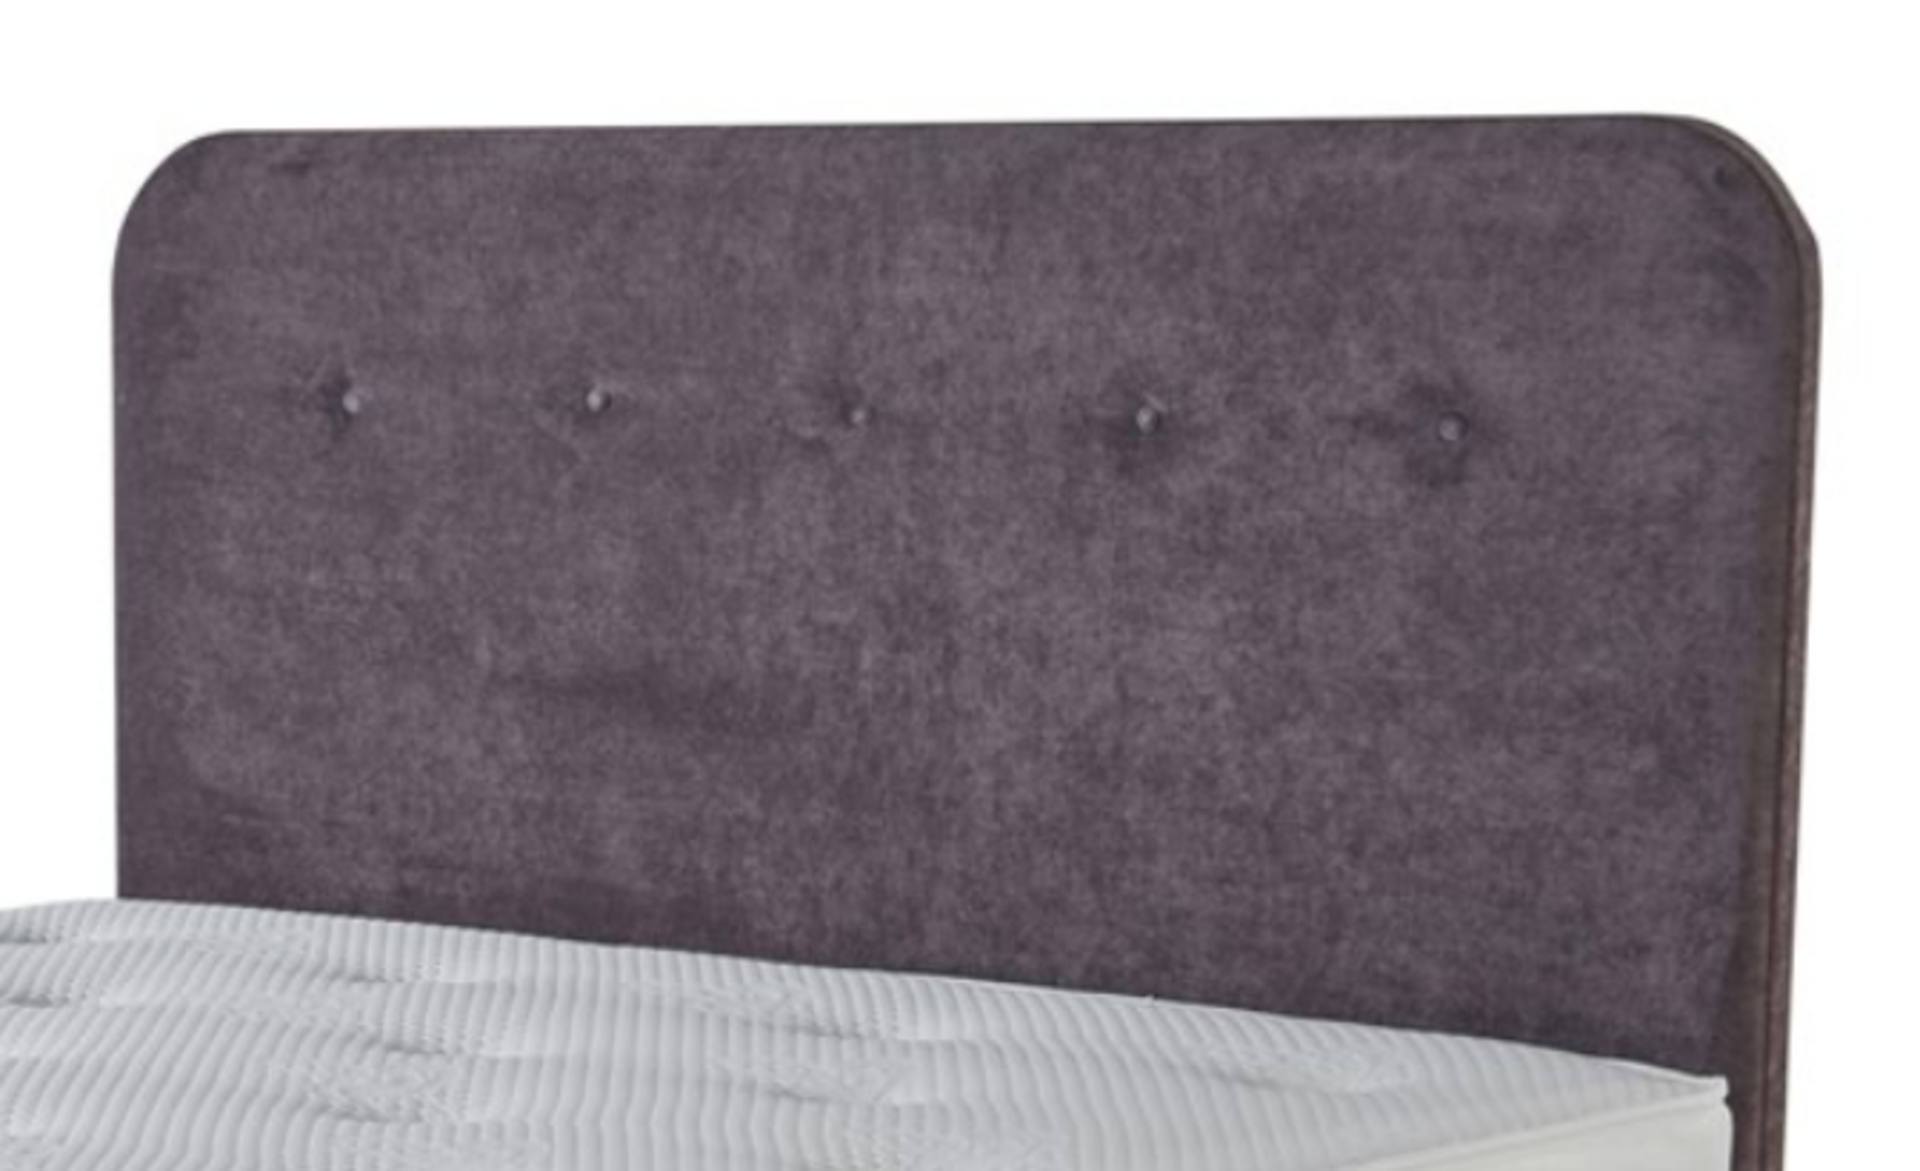 | 1X | CARPETRIGHT ARIZONA HEADBOARD 3FT SLATE | LOOKS TO BE IN GOOD CONDITION WITH PACKAGING |